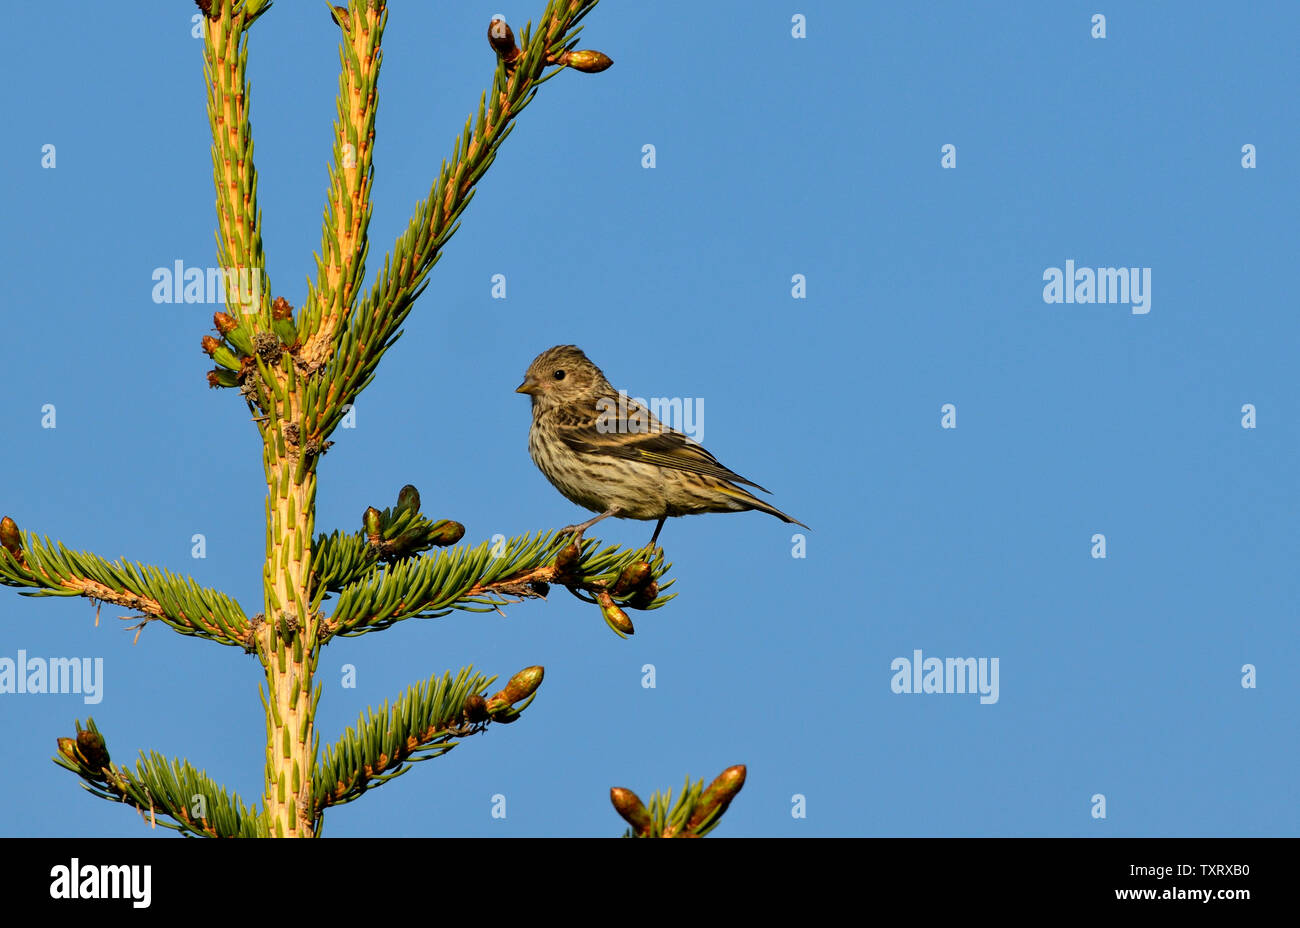 A horizontal image of a Pine Siskin bird ' Carduelis pinus', perched on a spruce tree branch against a blue sky background. Stock Photo